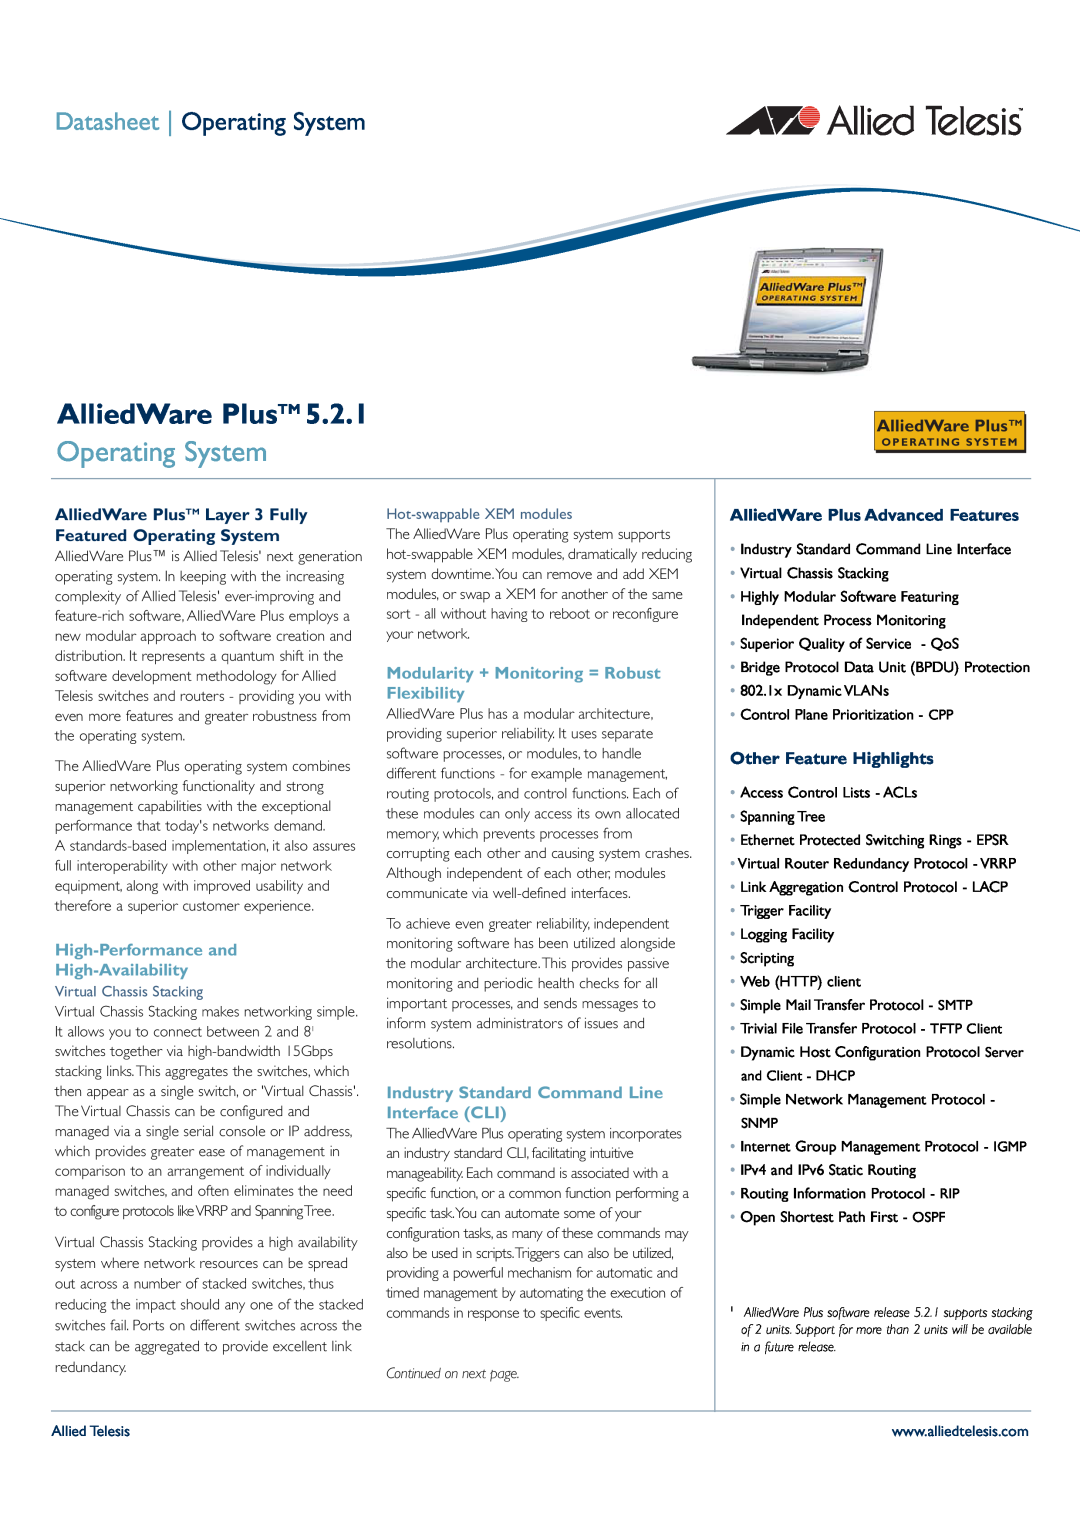 Allied Telesis 5.2.1 manual Operating System, High-Performance and High-Availability, AlliedWare Plus Advanced Features 